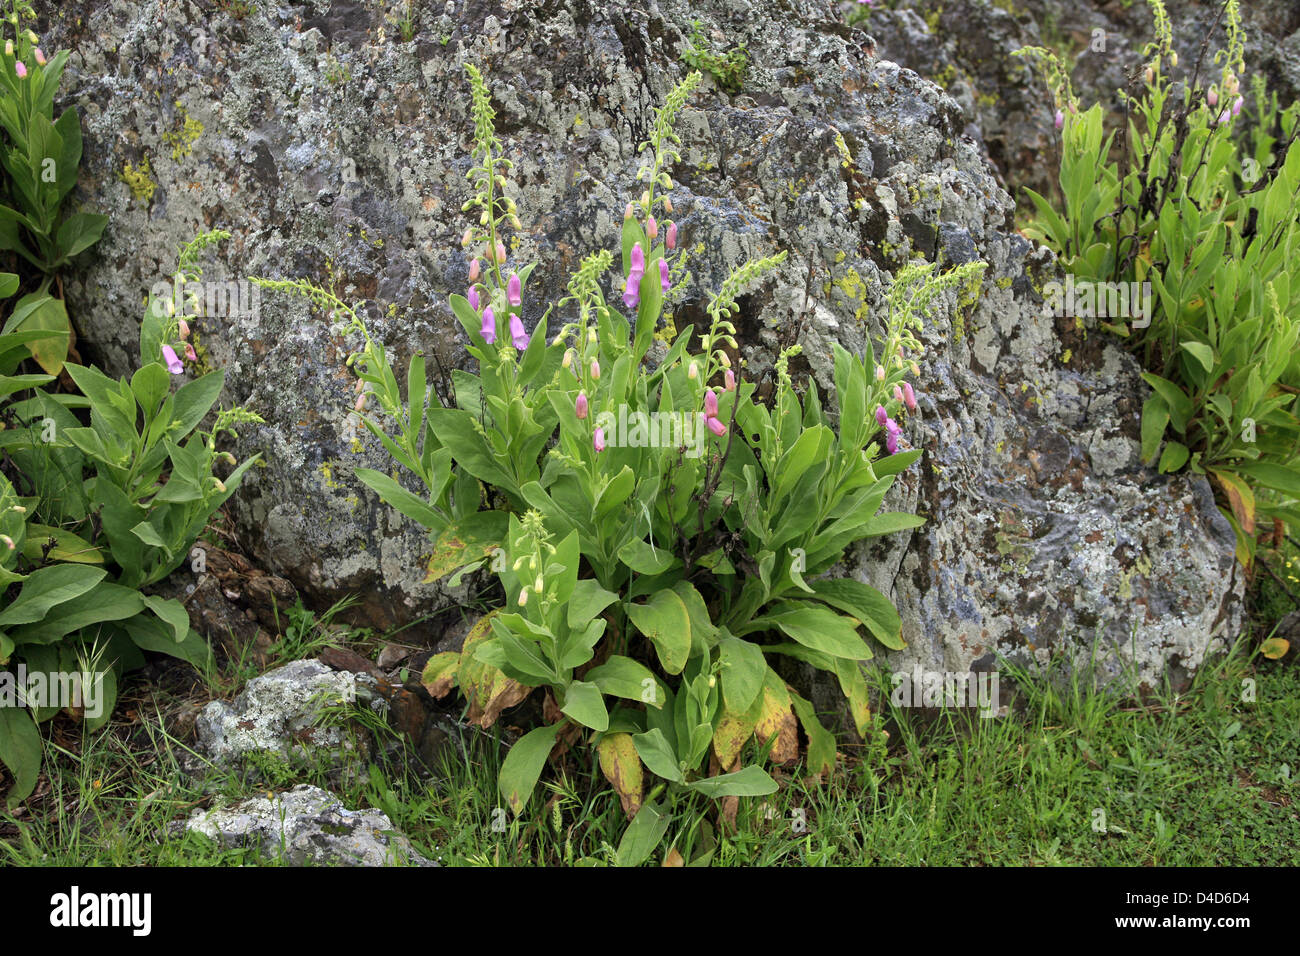 The picture shows Foxglove (Digitalis) in bloom on a rock near Cabeza del Buey, Spain, 24 April 2007. The plant is used to make medicine and it is poisenous. Photo: Hinrich Baesemann Stock Photo